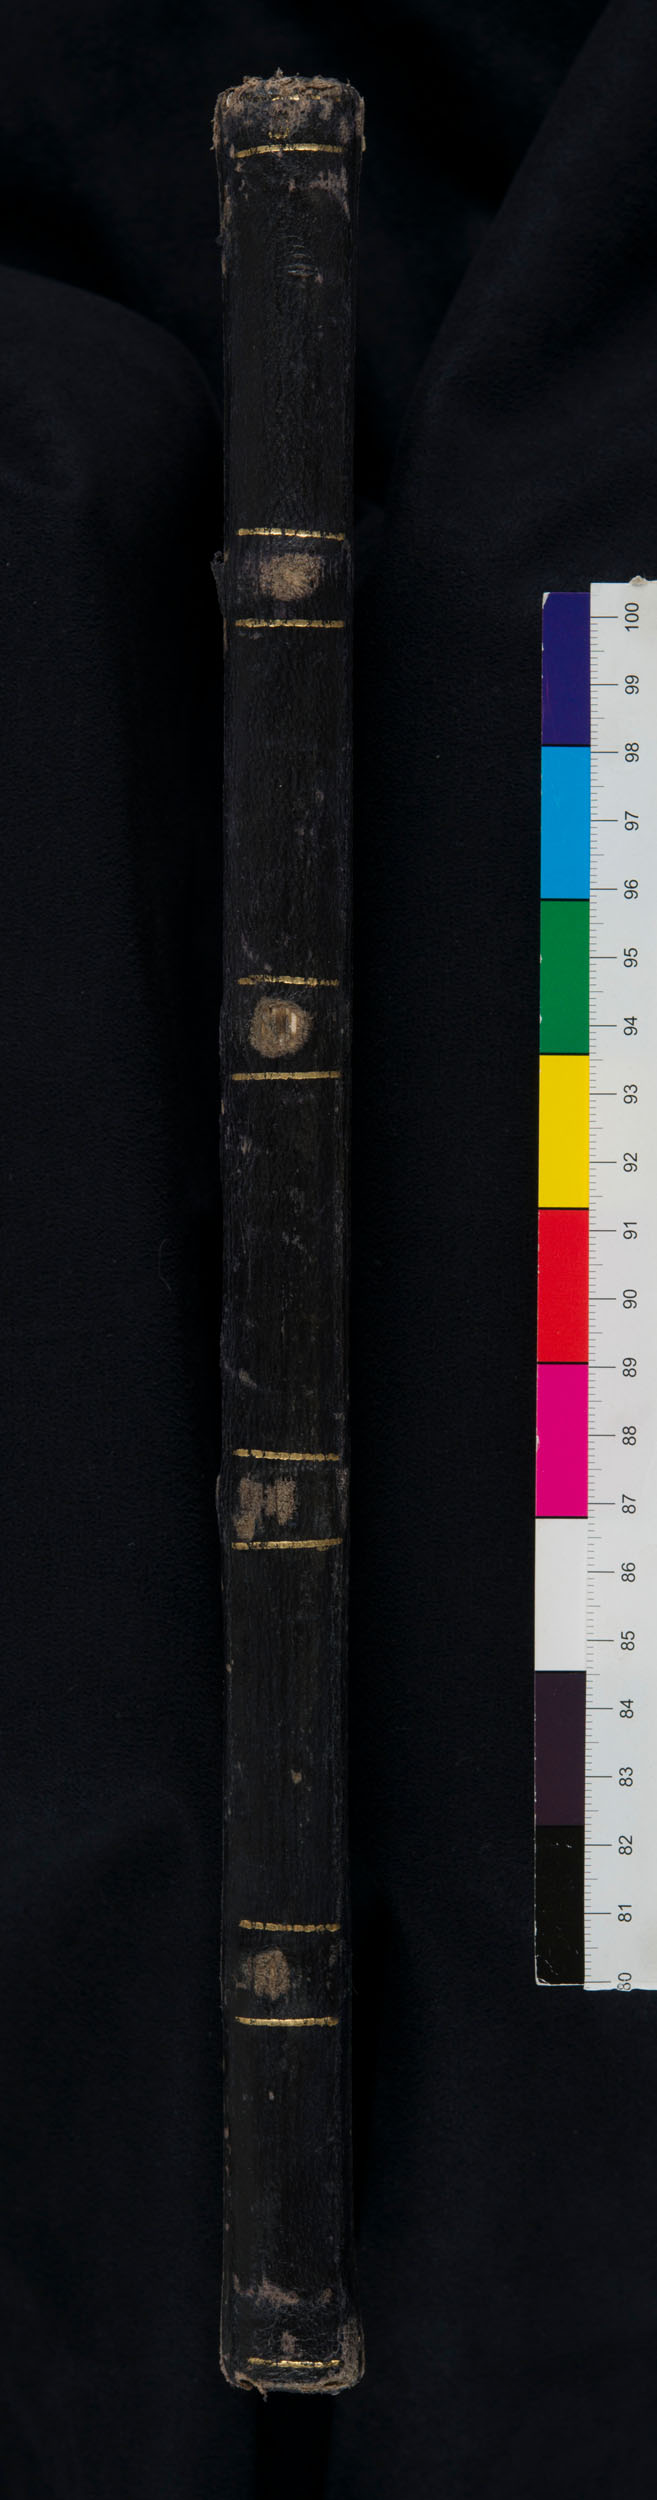 An image of the spine of the second Unyanyembe Journal (Livingstone 1871n:[12]). Copyright David Livingstone Centre. Creative Commons Attribution-NonCommercial 3.0 Unported (https://creativecommons.org/licenses/by-nc/3.0/).